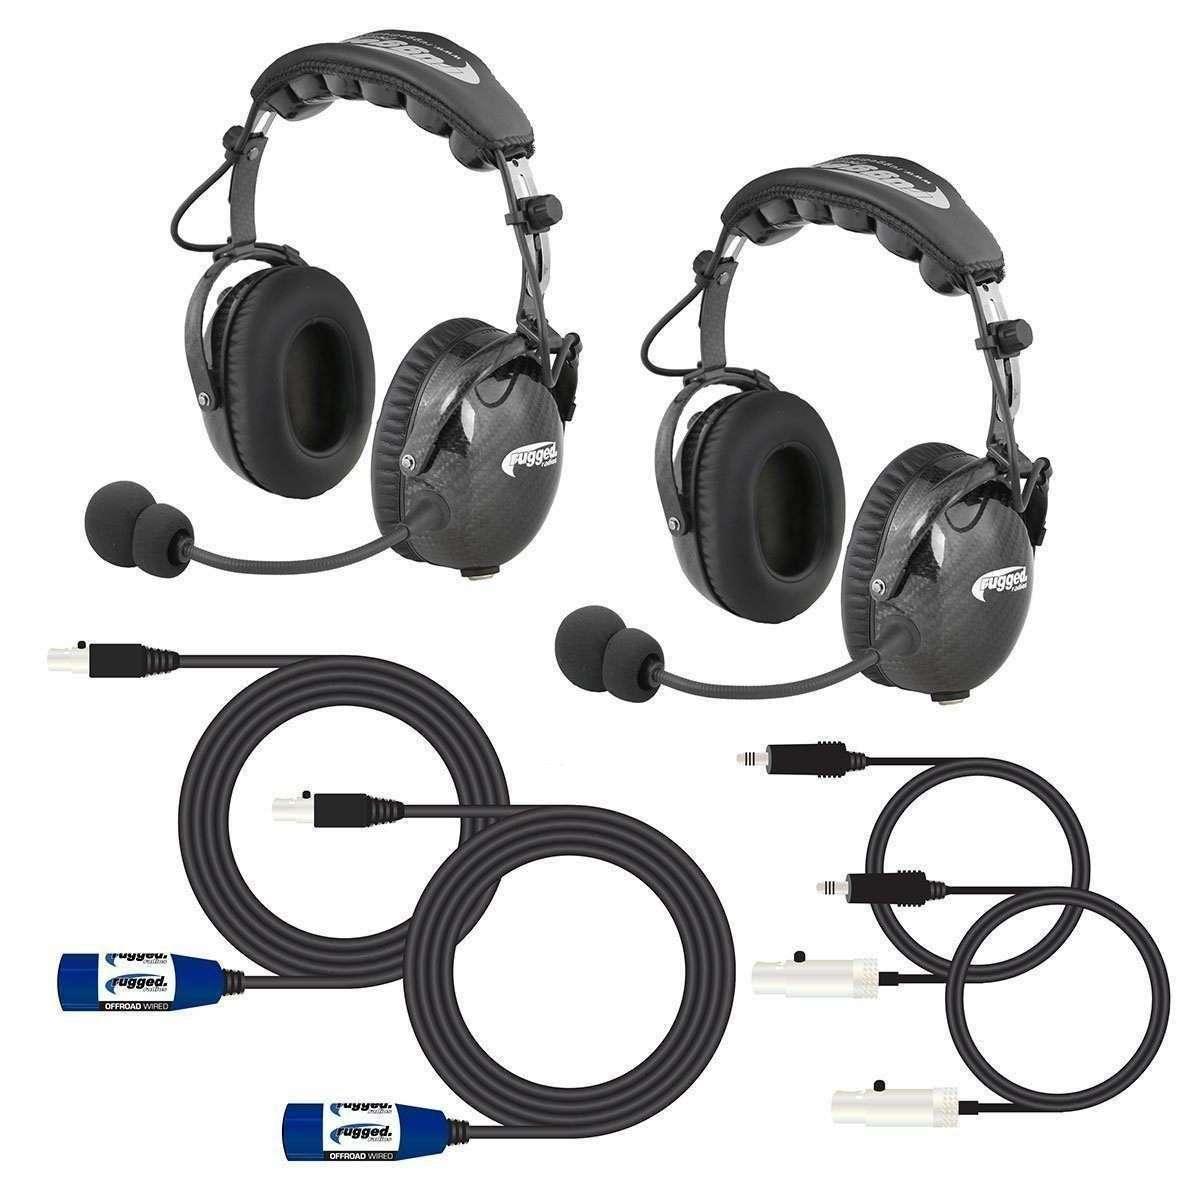 Expand to 4 Place with Alpha Bass Carbon Fiber Headsets - R1 Industries